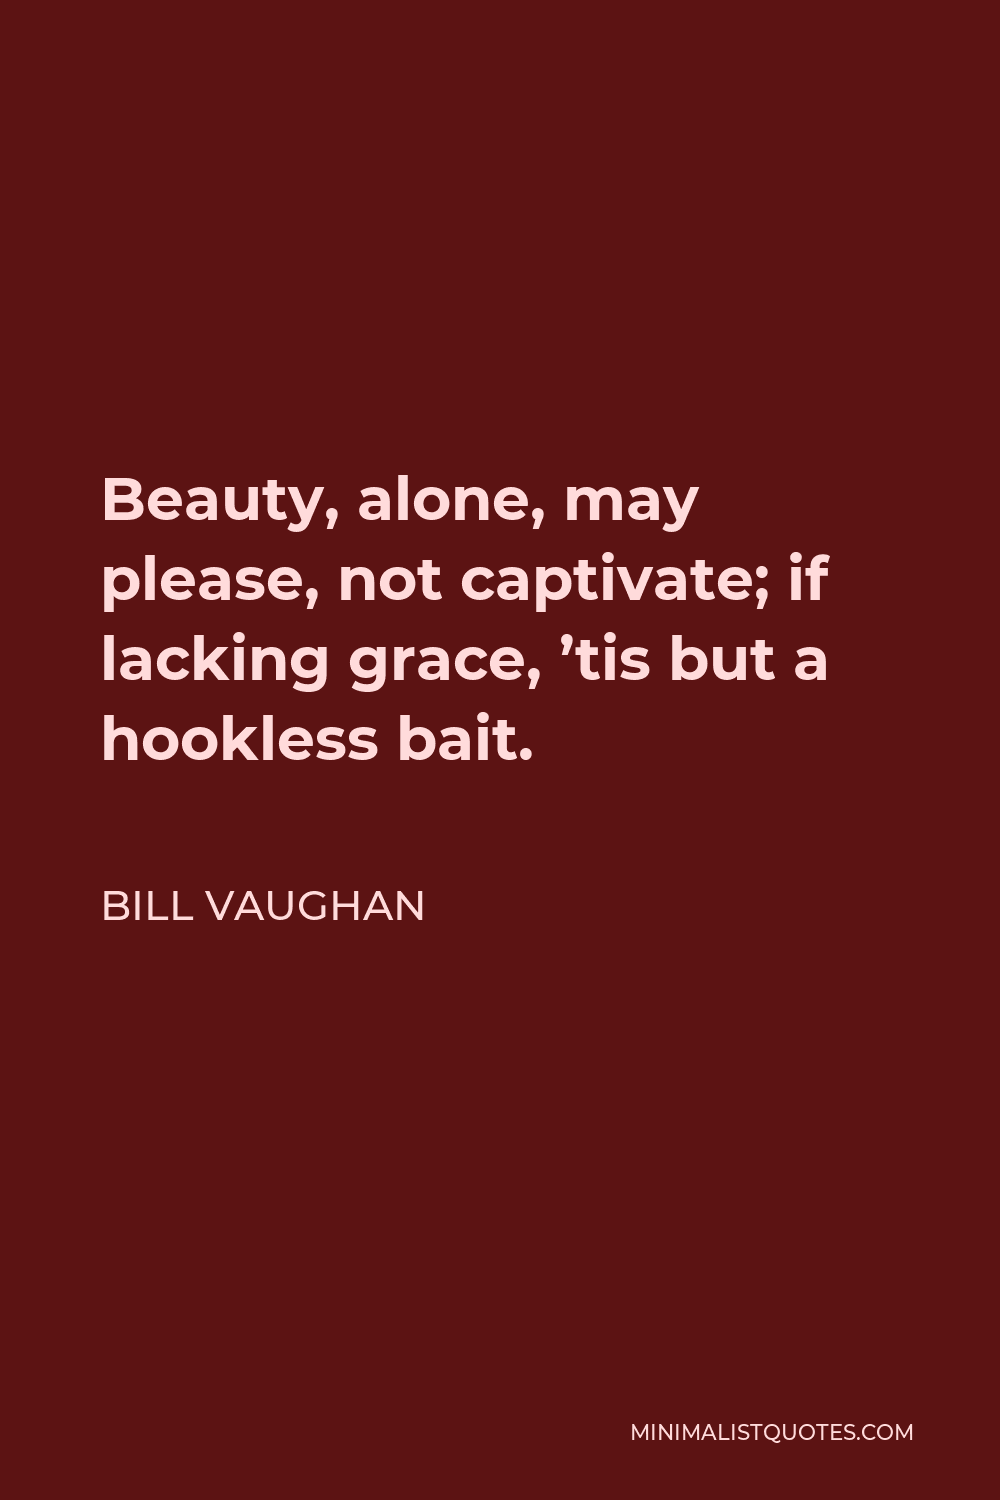 Bill Vaughan Quote - Beauty, alone, may please, not captivate; if lacking grace, ’tis but a hookless bait.